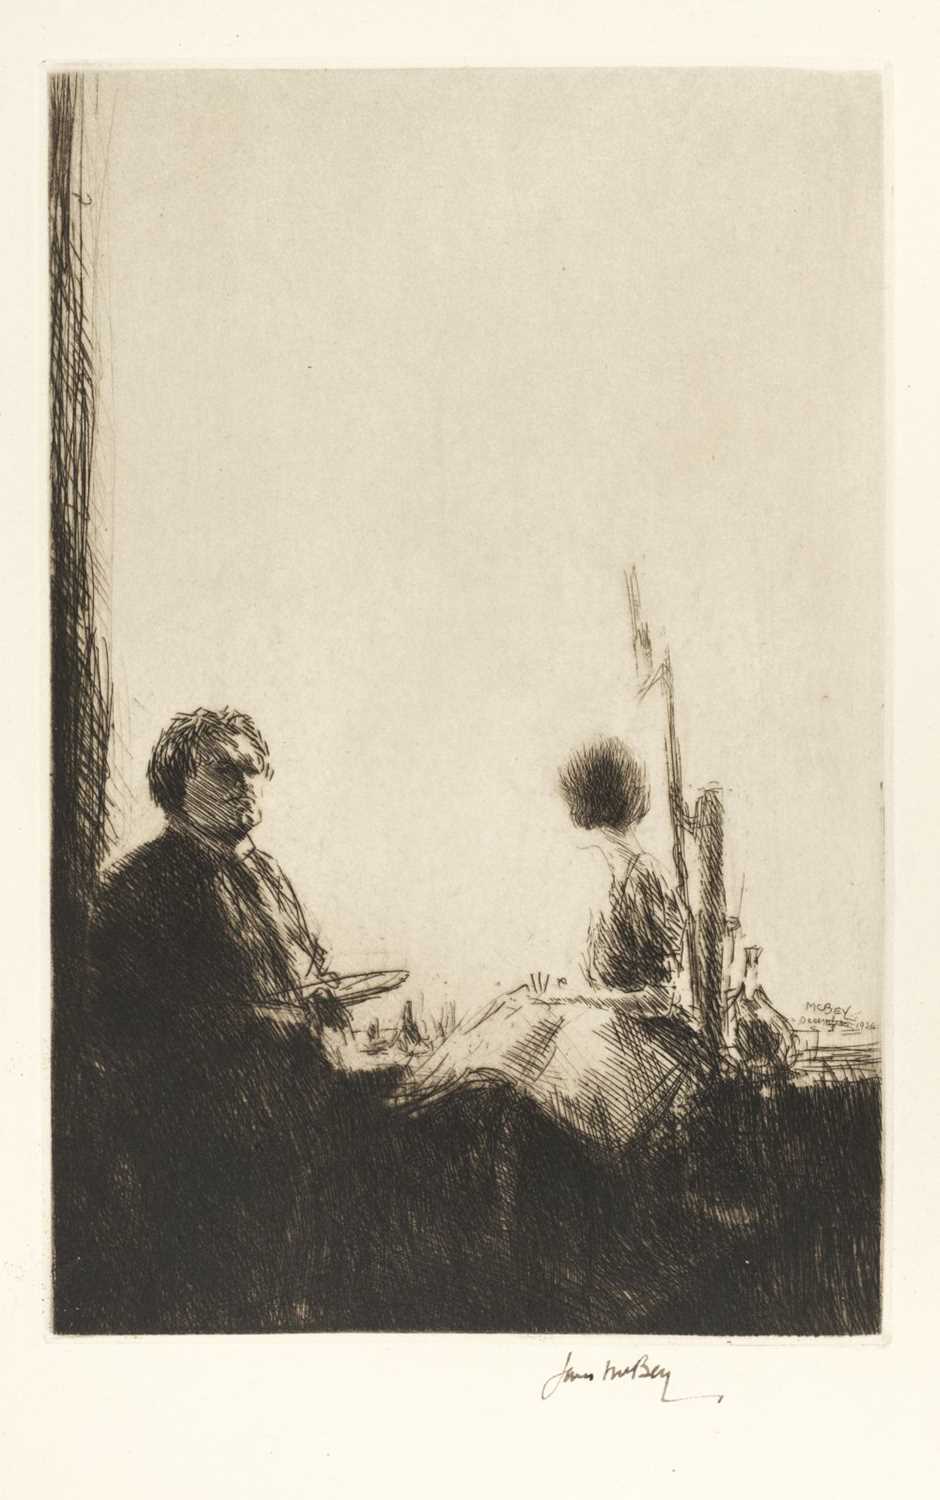 Lot 536 - Hardie (Martin). Etchings and Dry Points from 1902 to 1924